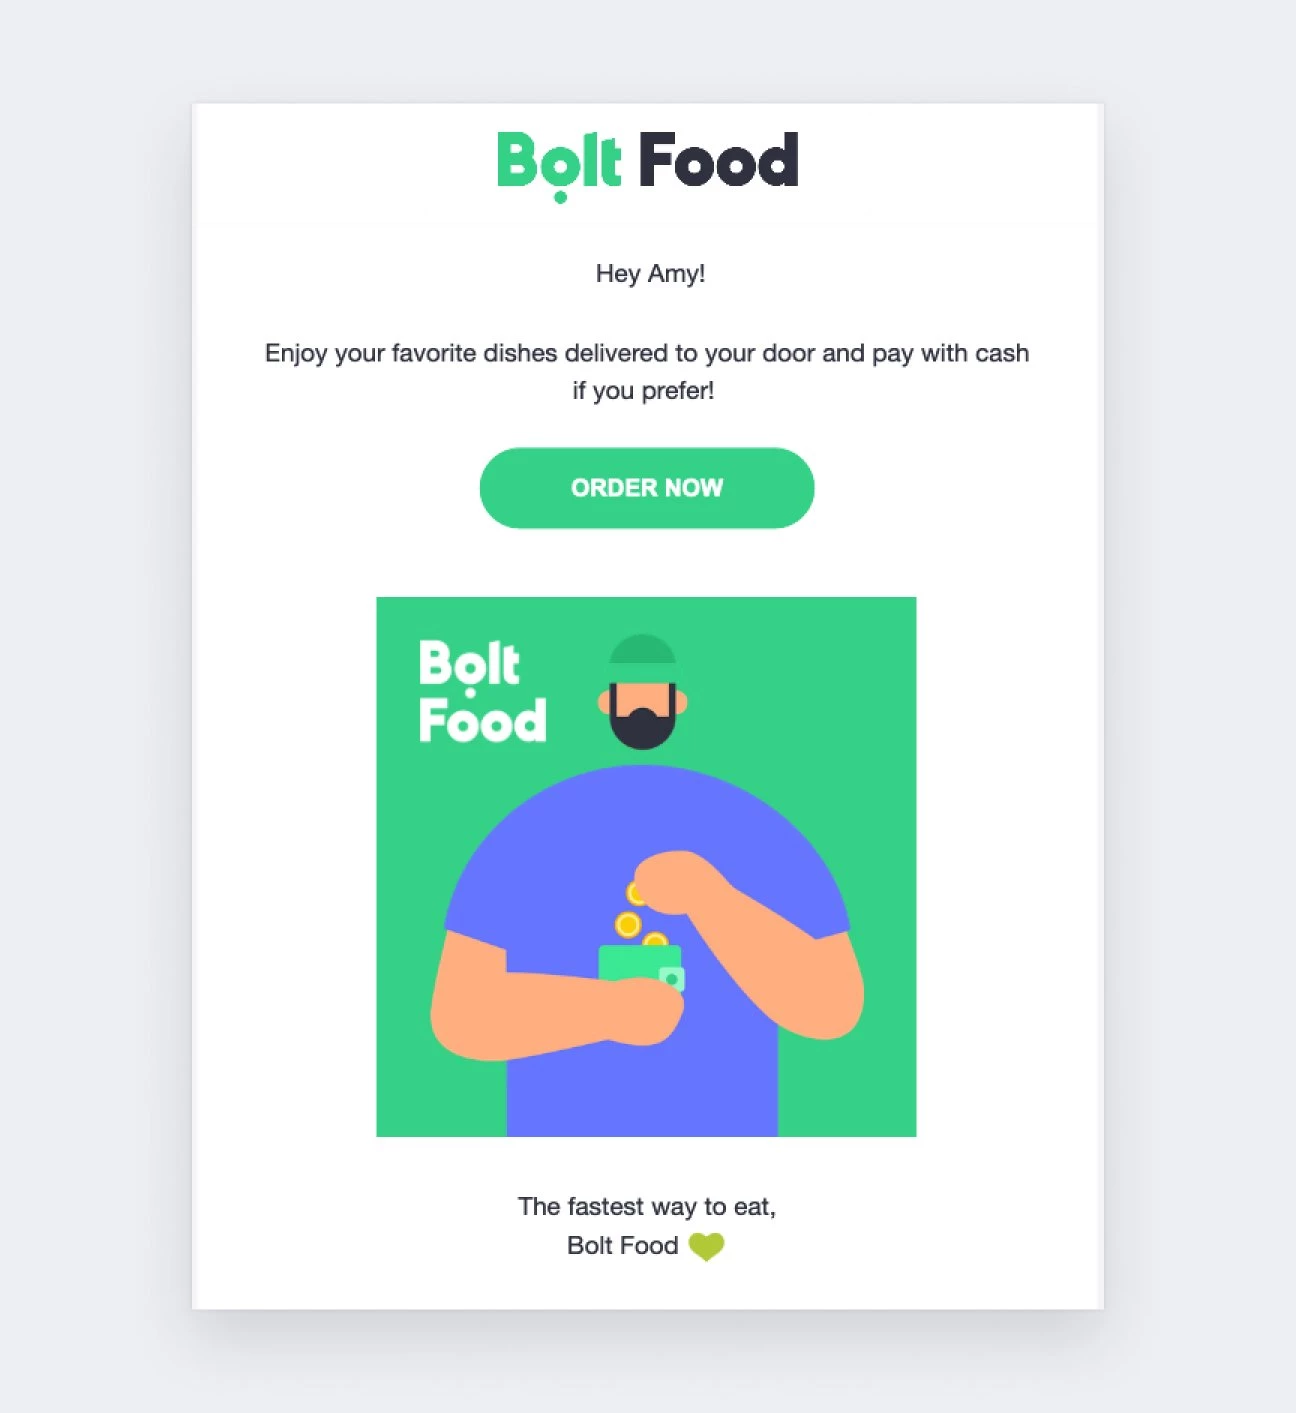 Lead nurturing example - Bolt food order now cleat CTA green